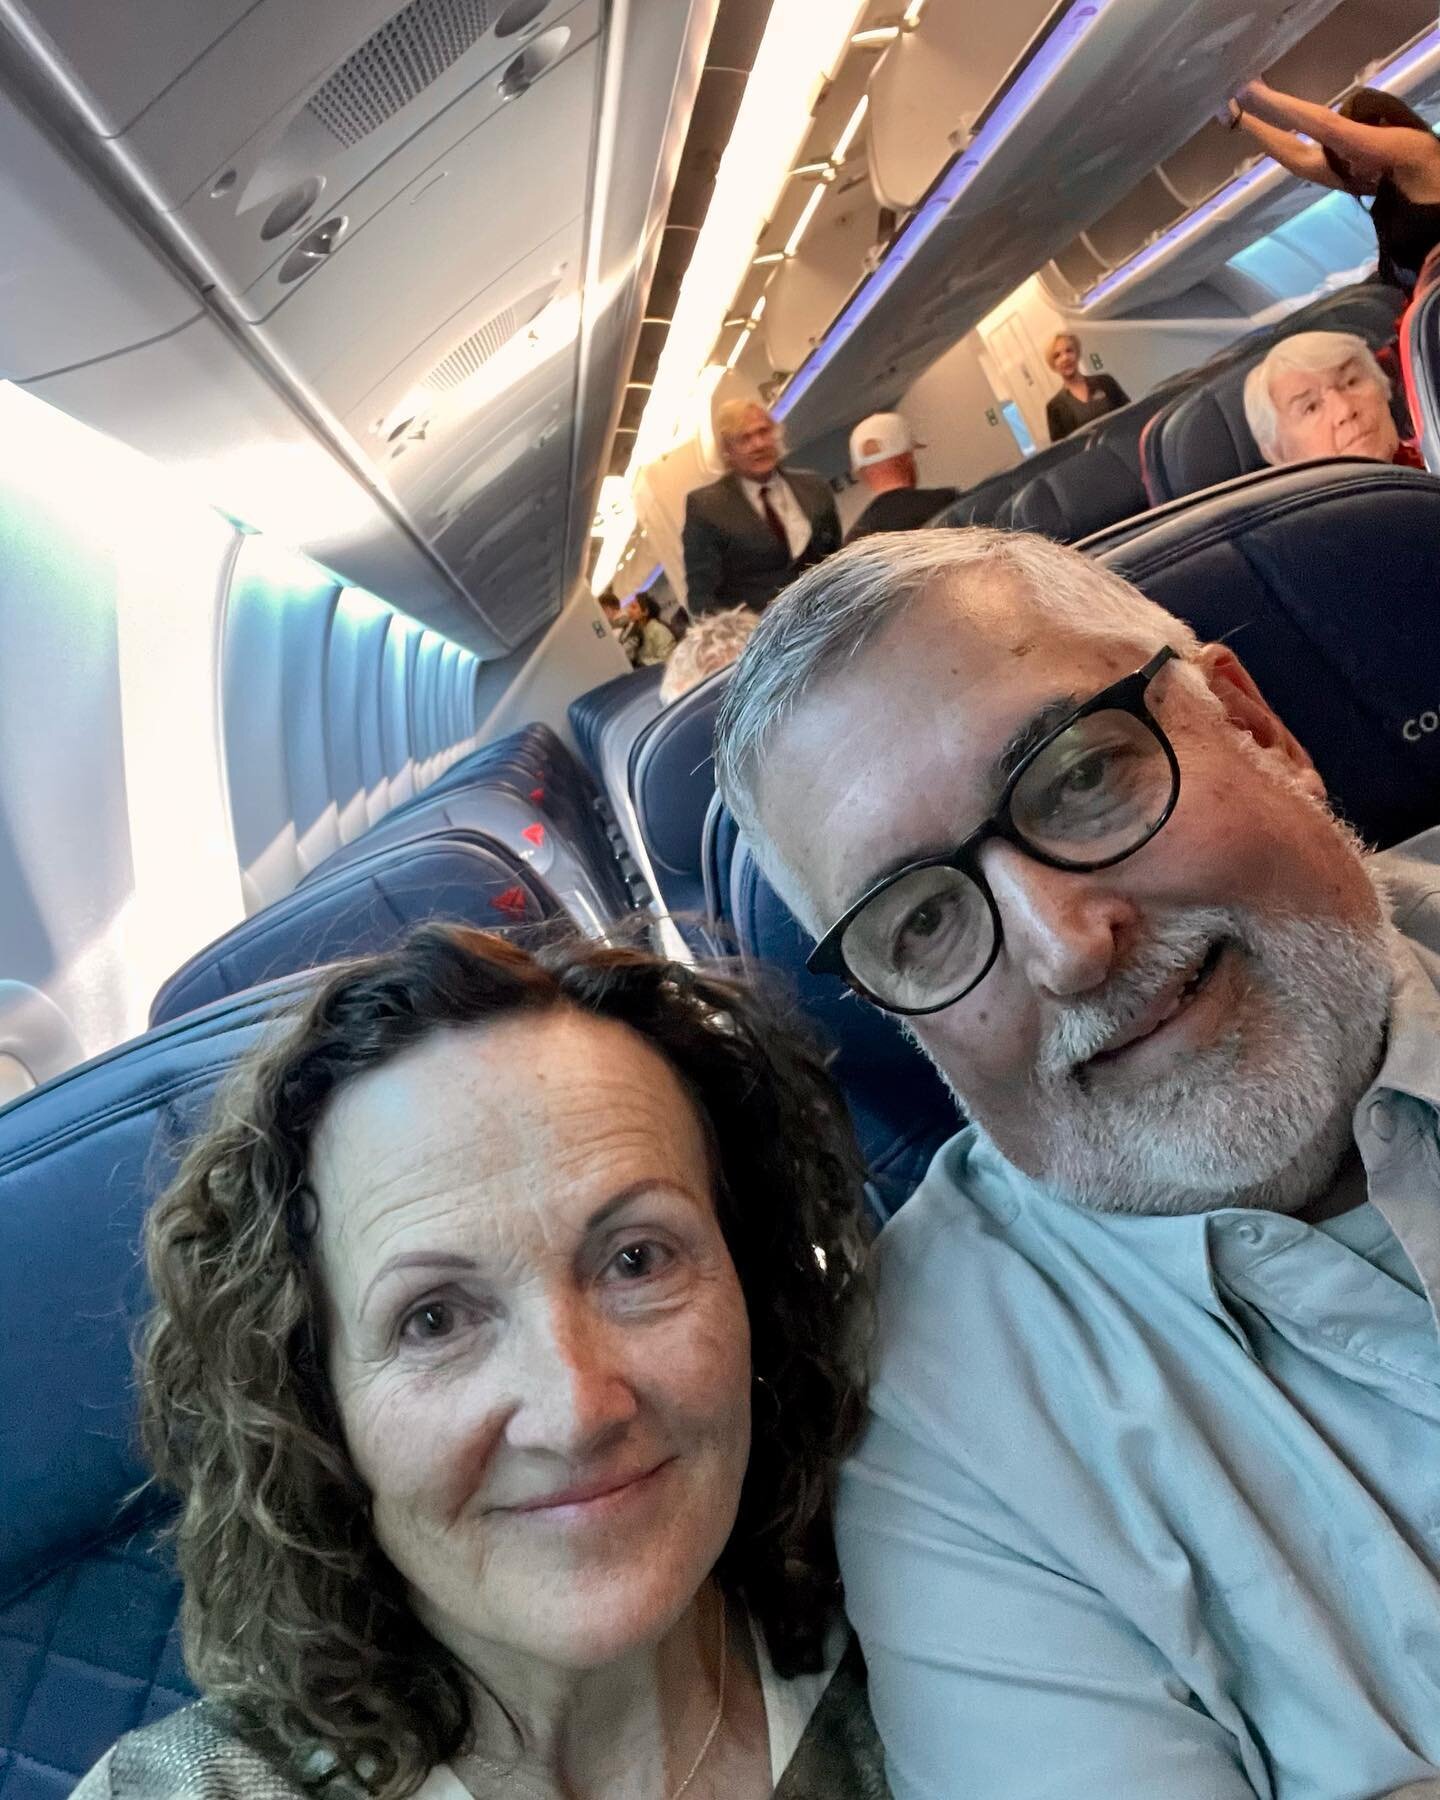 We&rsquo;re off. In more ways than one.
Heading to Iraq for a wheelchair trip AND I want to say goodbye for now to those of you who have hung around here lately.
I&rsquo;ve decided to take a &ldquo;summer sabbatical&ldquo; from posting in order to sp